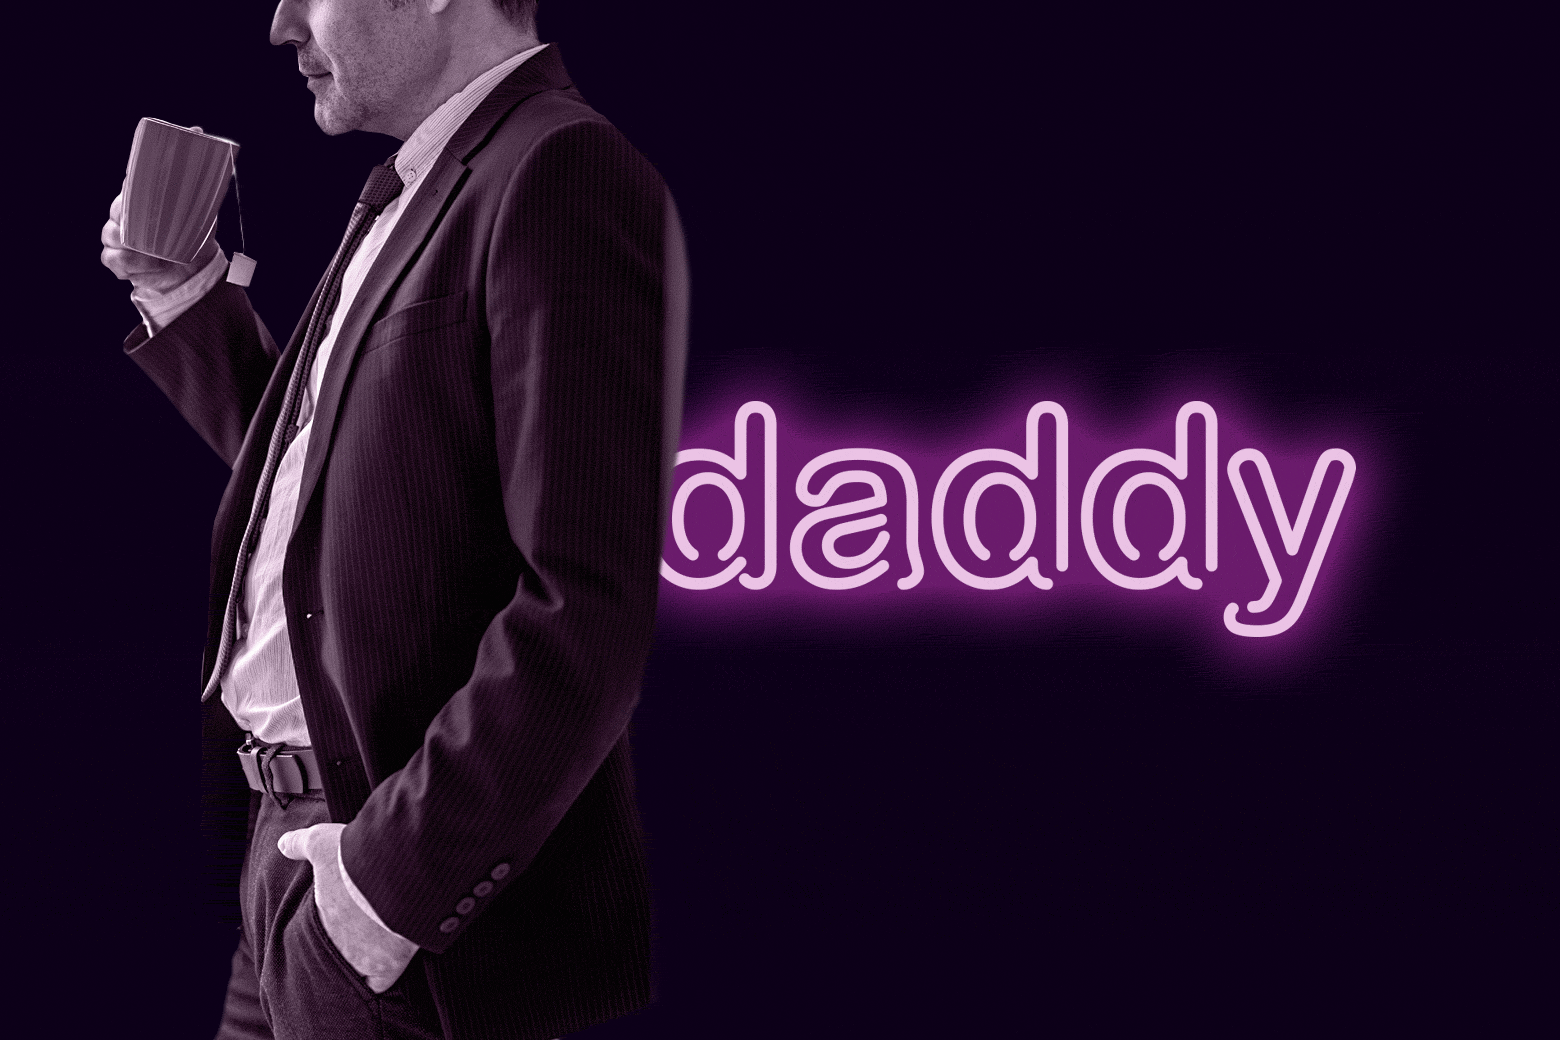 Call me Daddy. Daddy Issues 800. Daddy touched me. Daddy not.